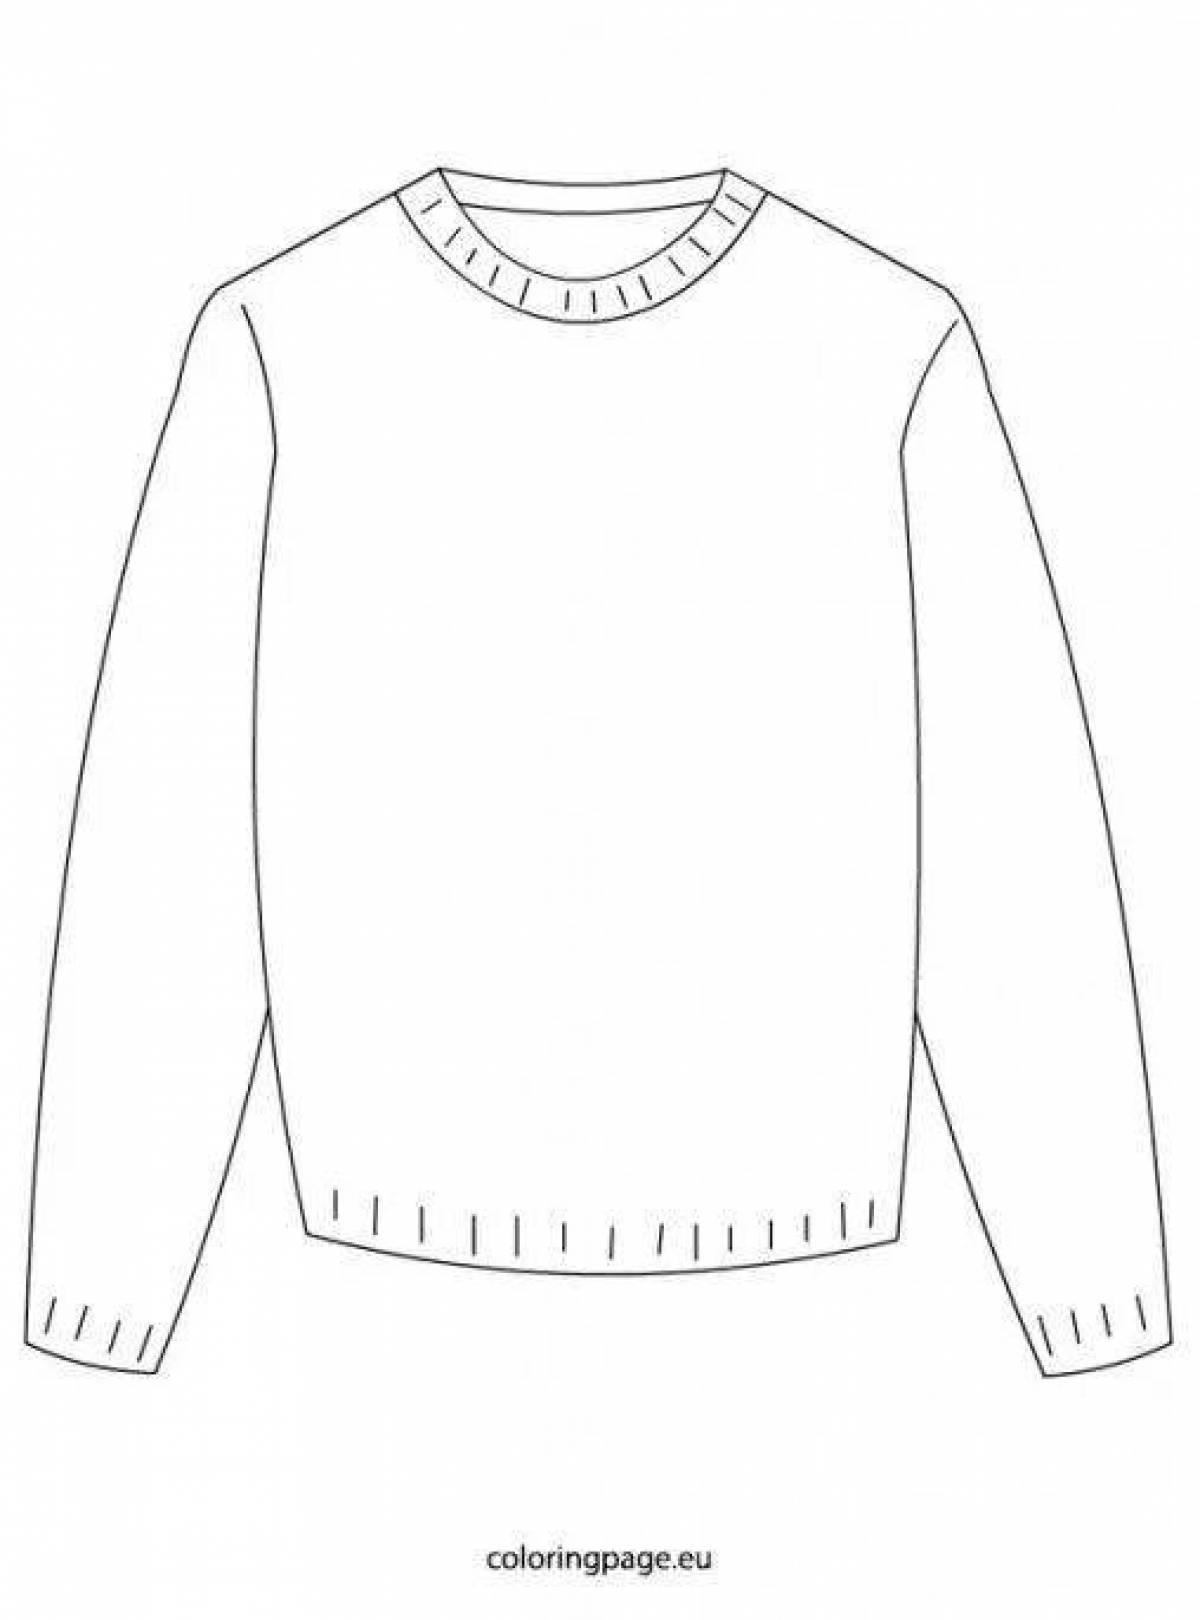 Fine sweater coloring page for 4-5 year olds